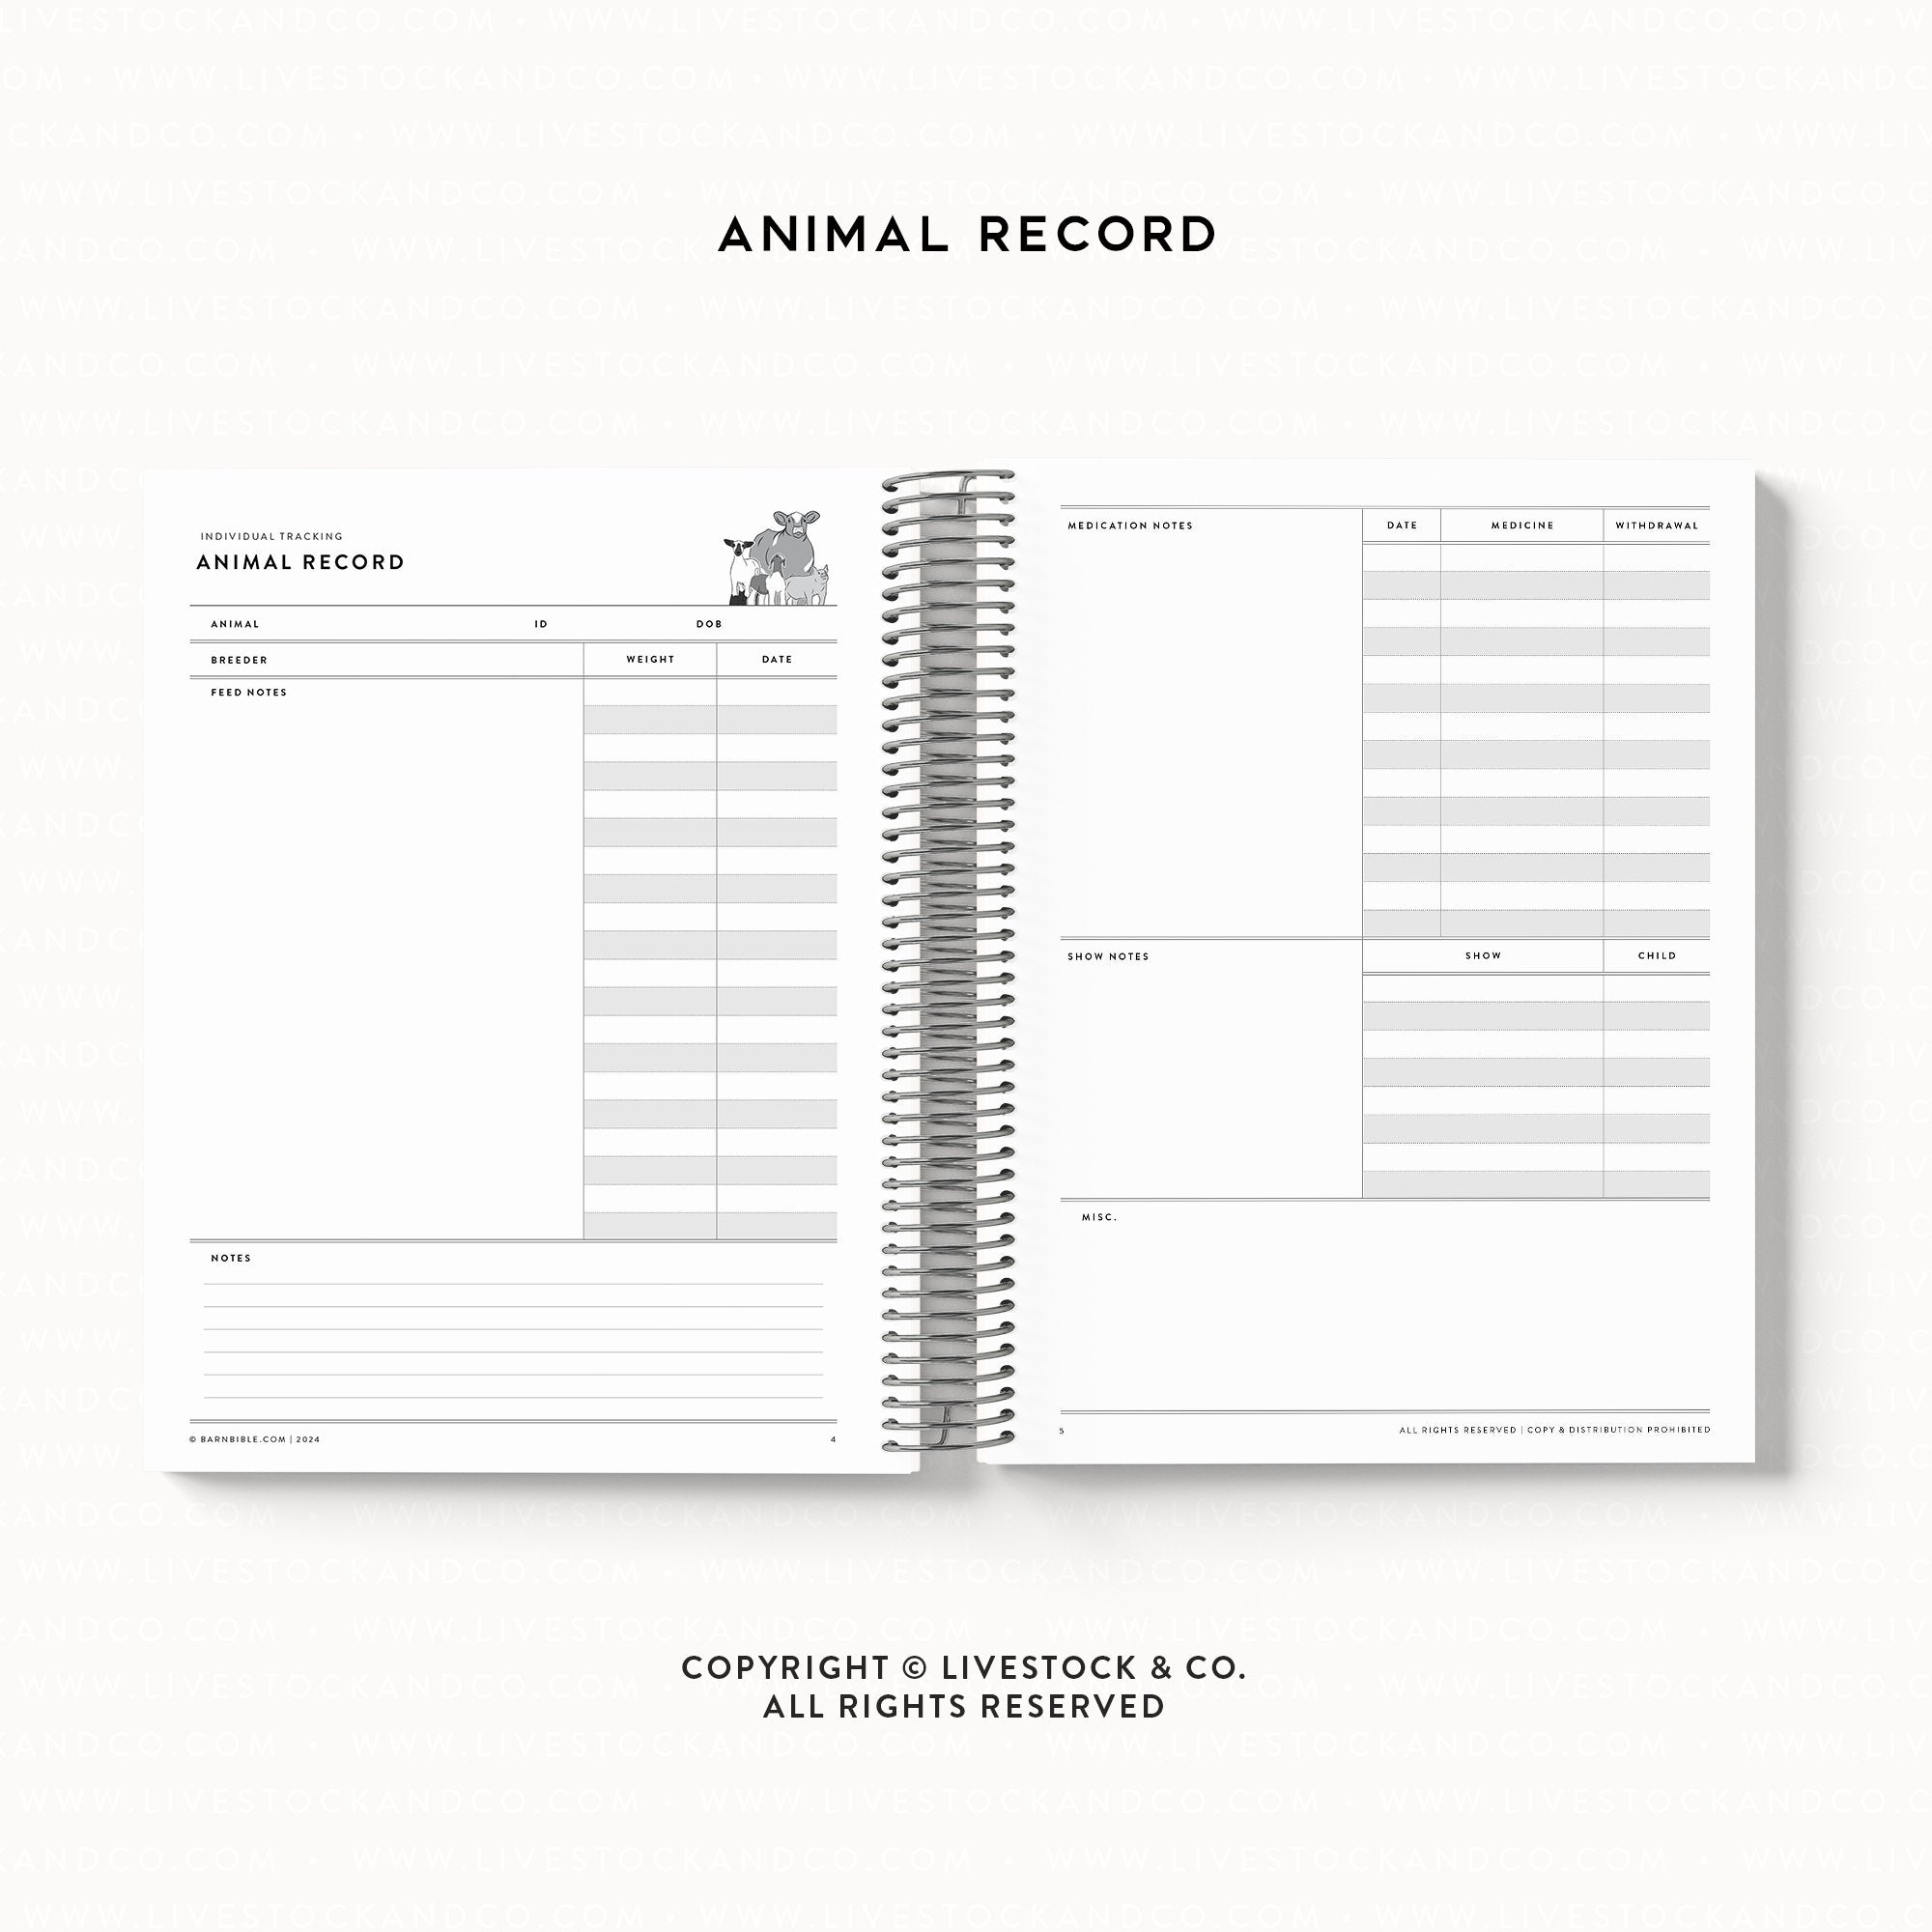 Personalized-Livestock-Animal Record Planner - Gingham Cover